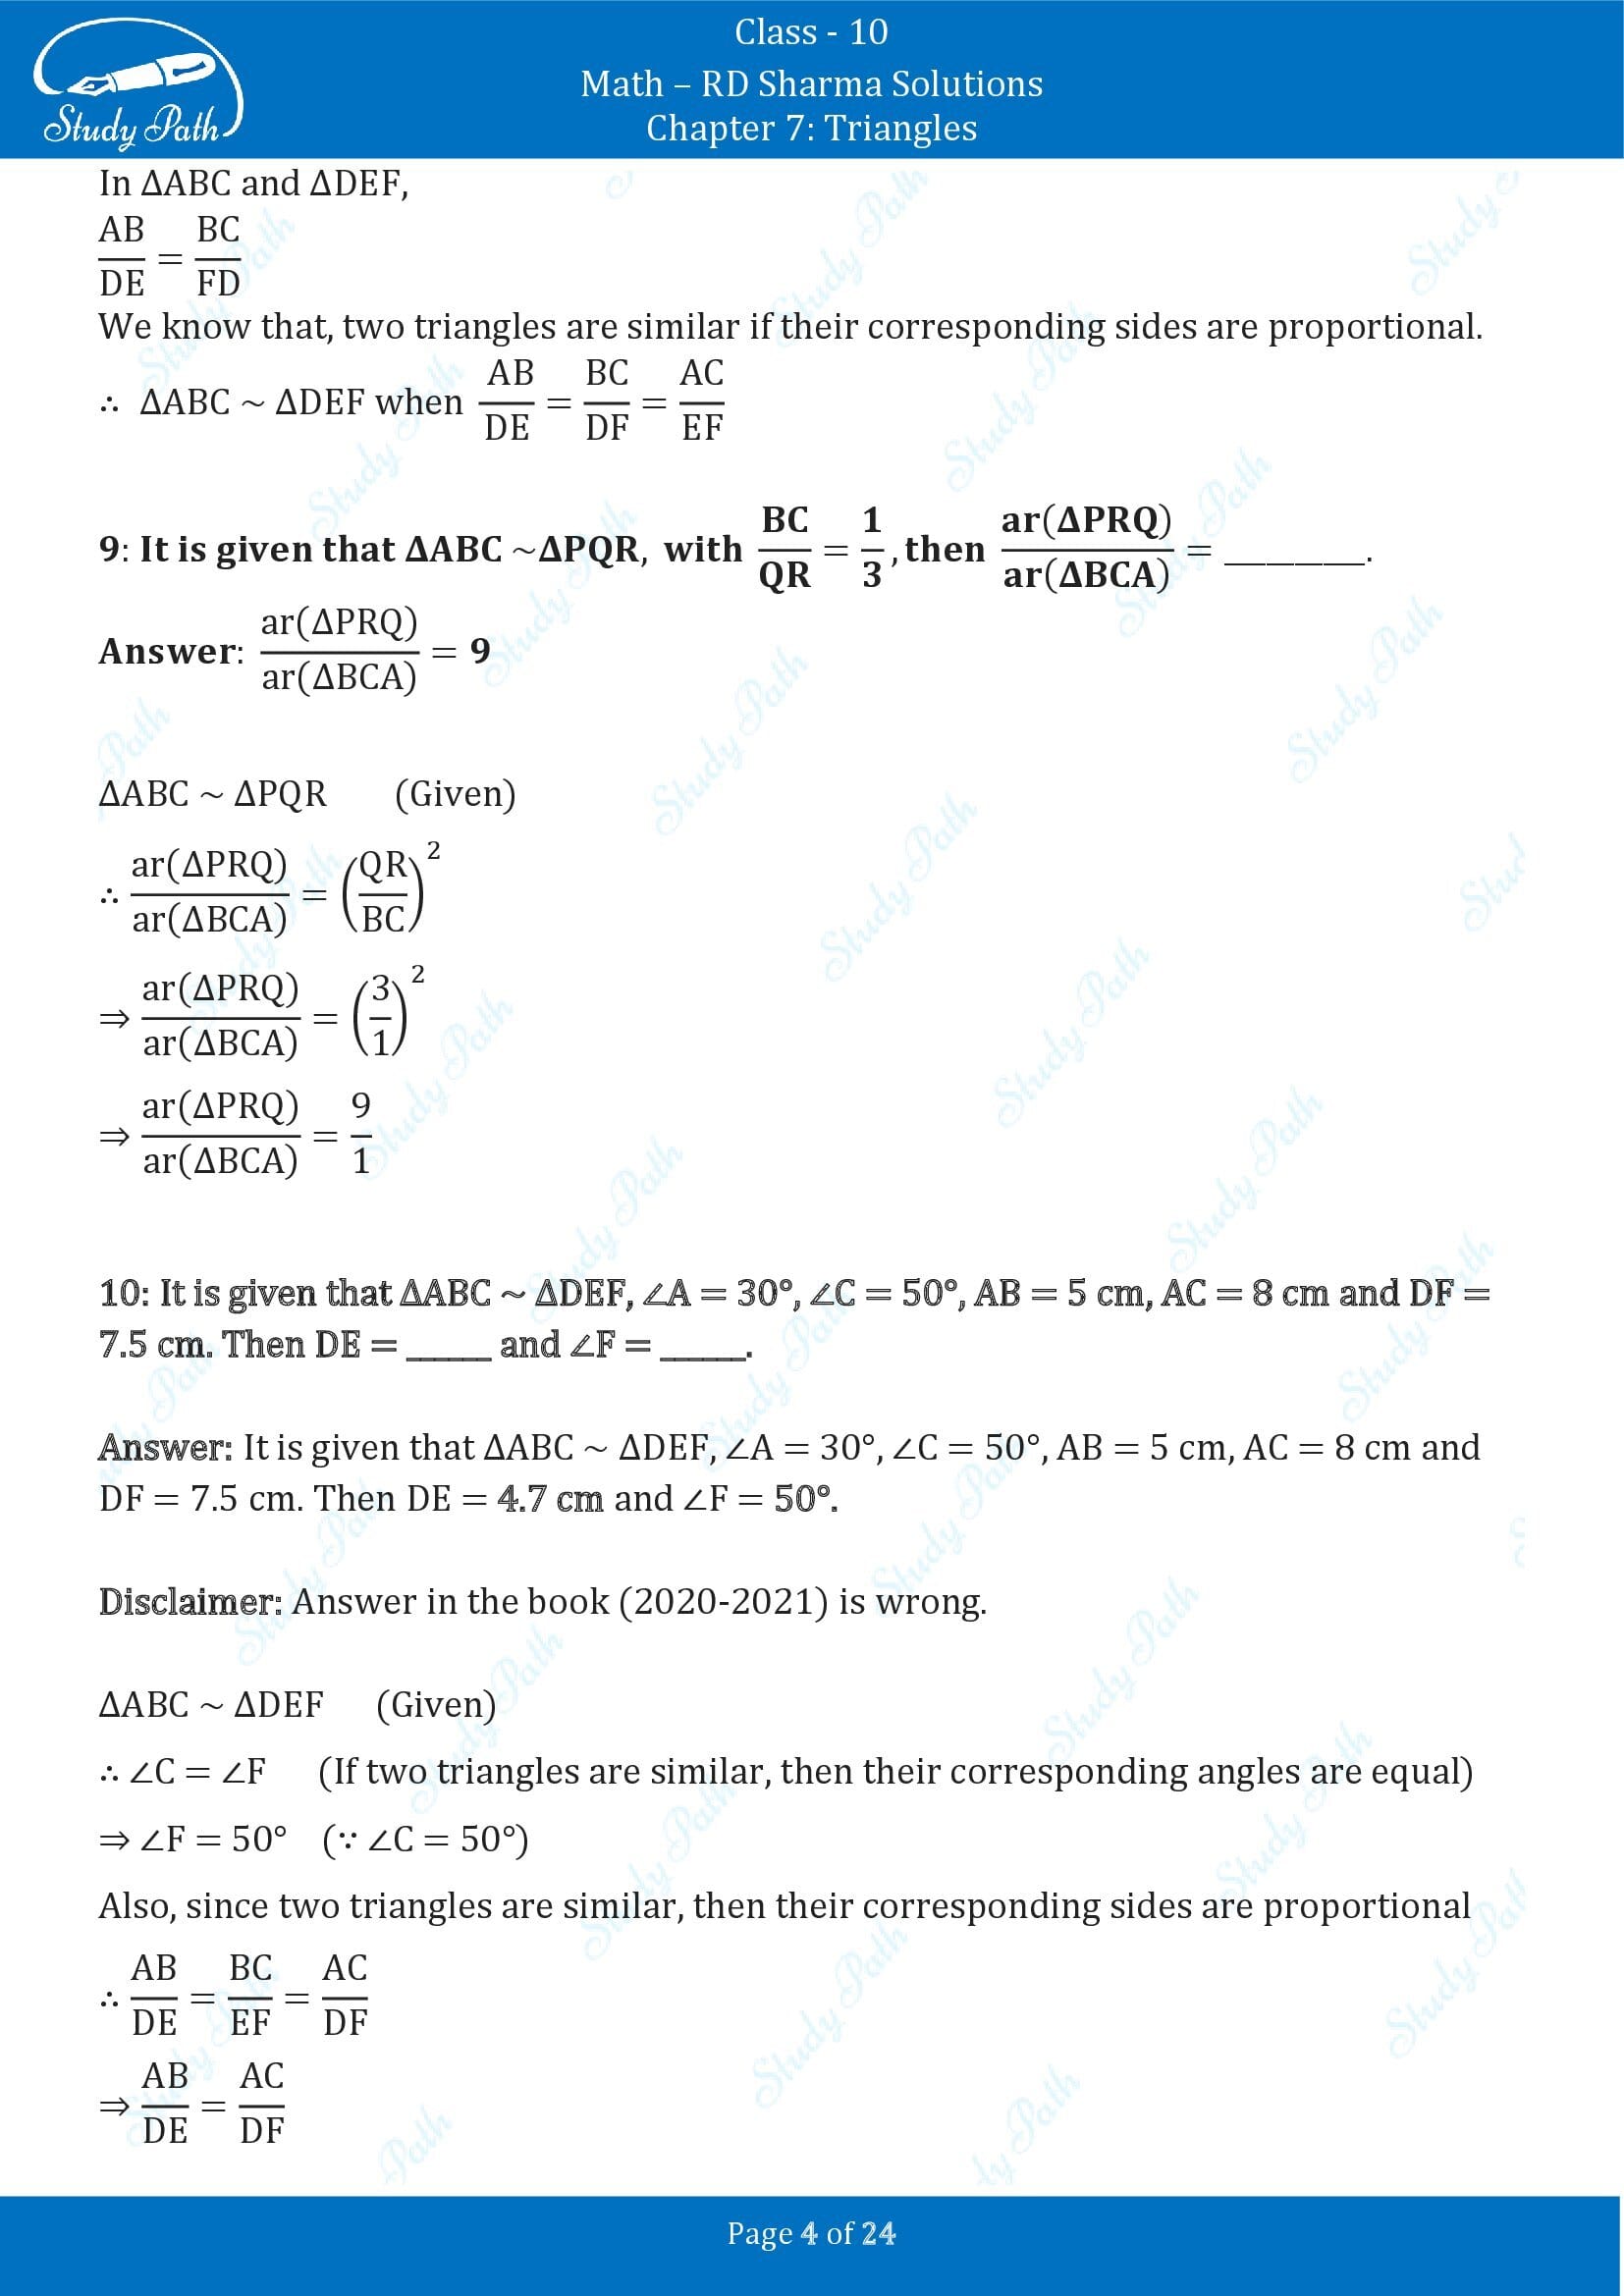 RD Sharma Solutions Class 10 Chapter 7 Triangles Fill in the Blank Type Questions FBQs 00004